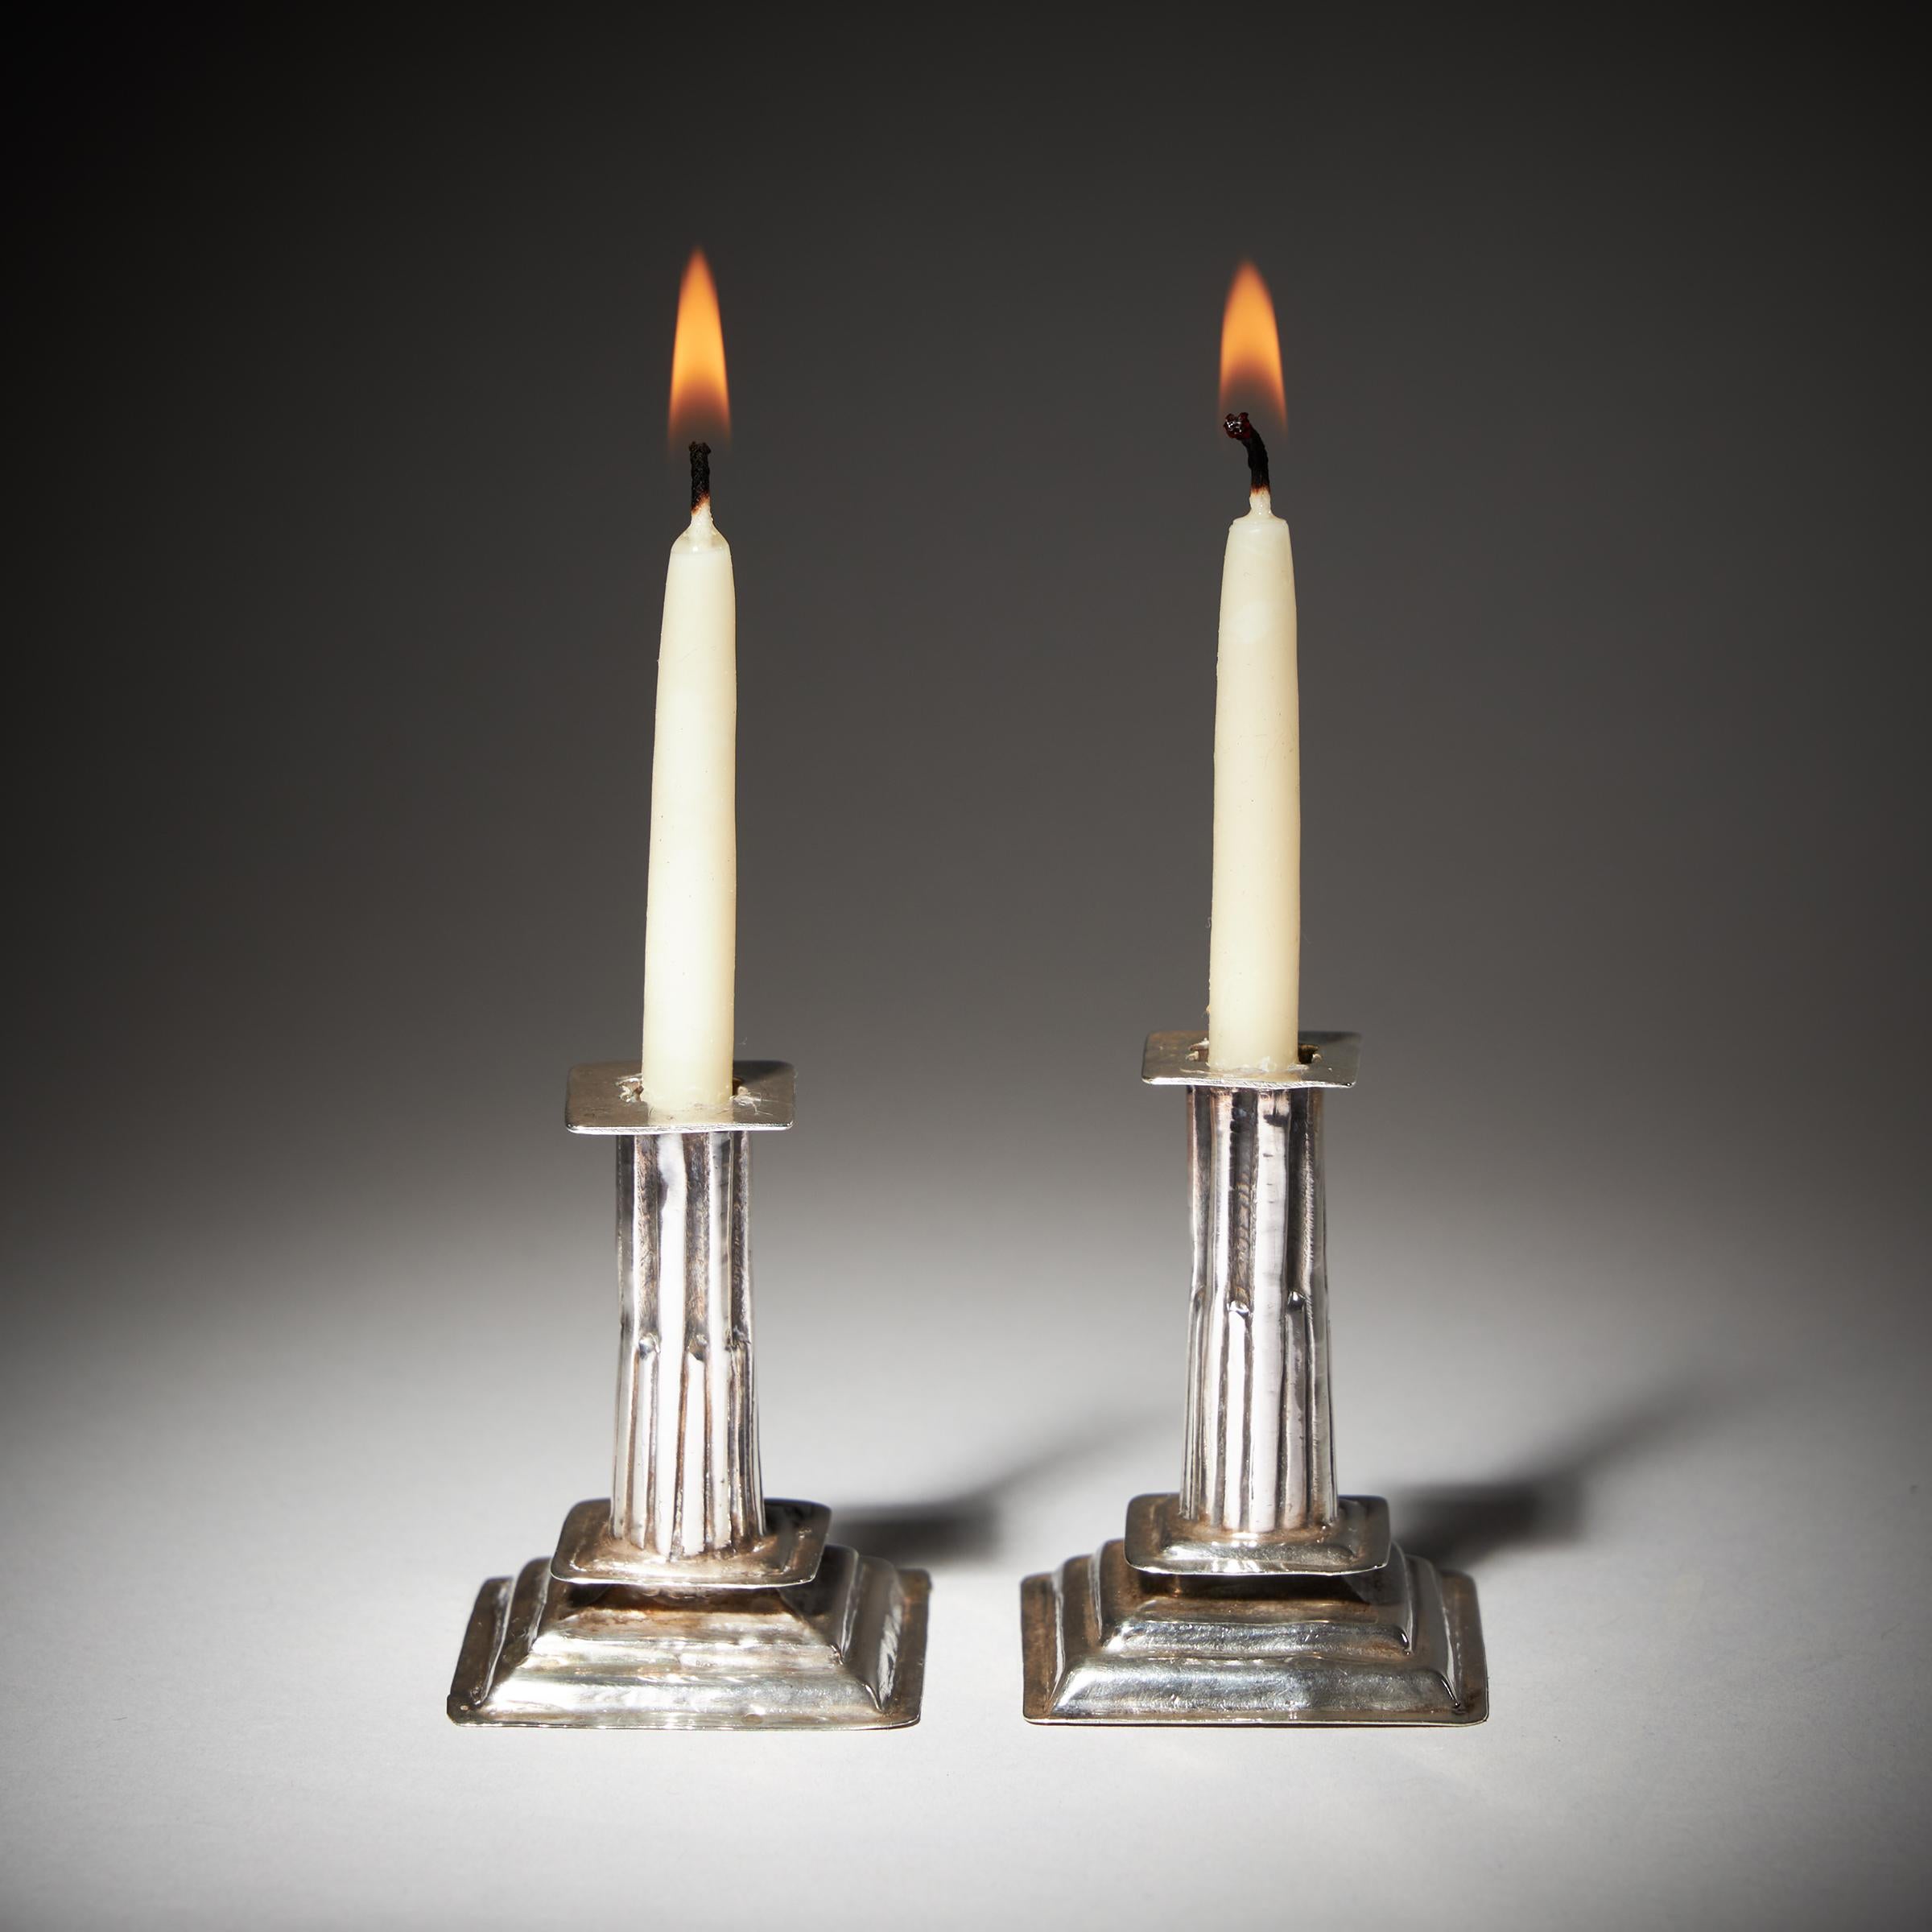 A Pair of 17th Century William and Mary Miniature Candlesticks By George Manjoy 1